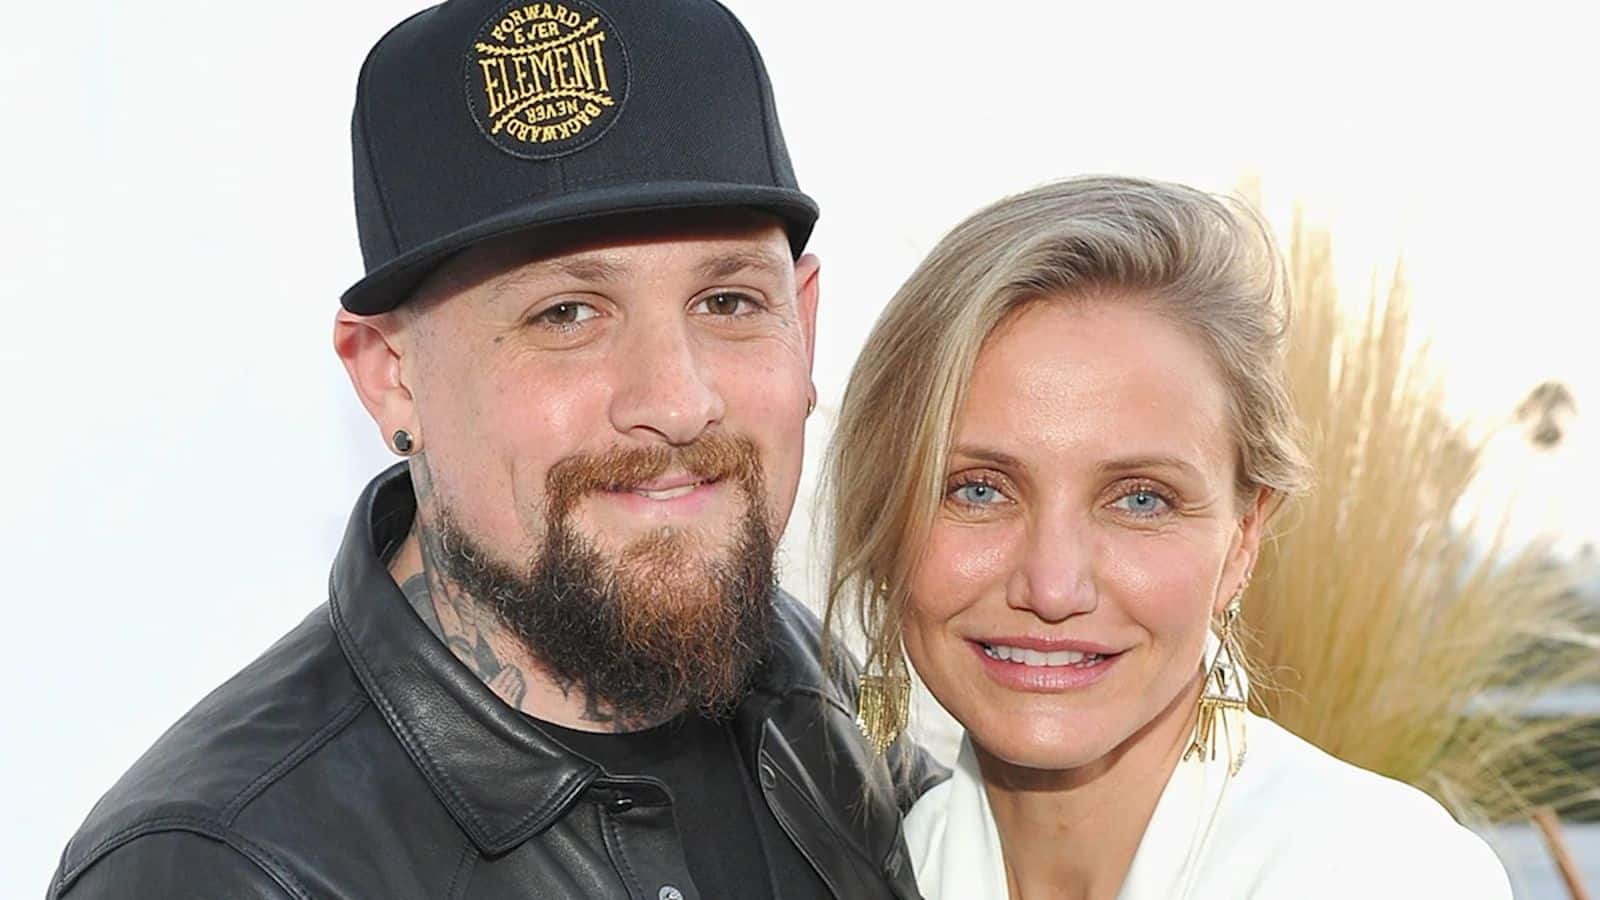 Cameron Diaz (51) secretly welcomes second child with Benji Madden